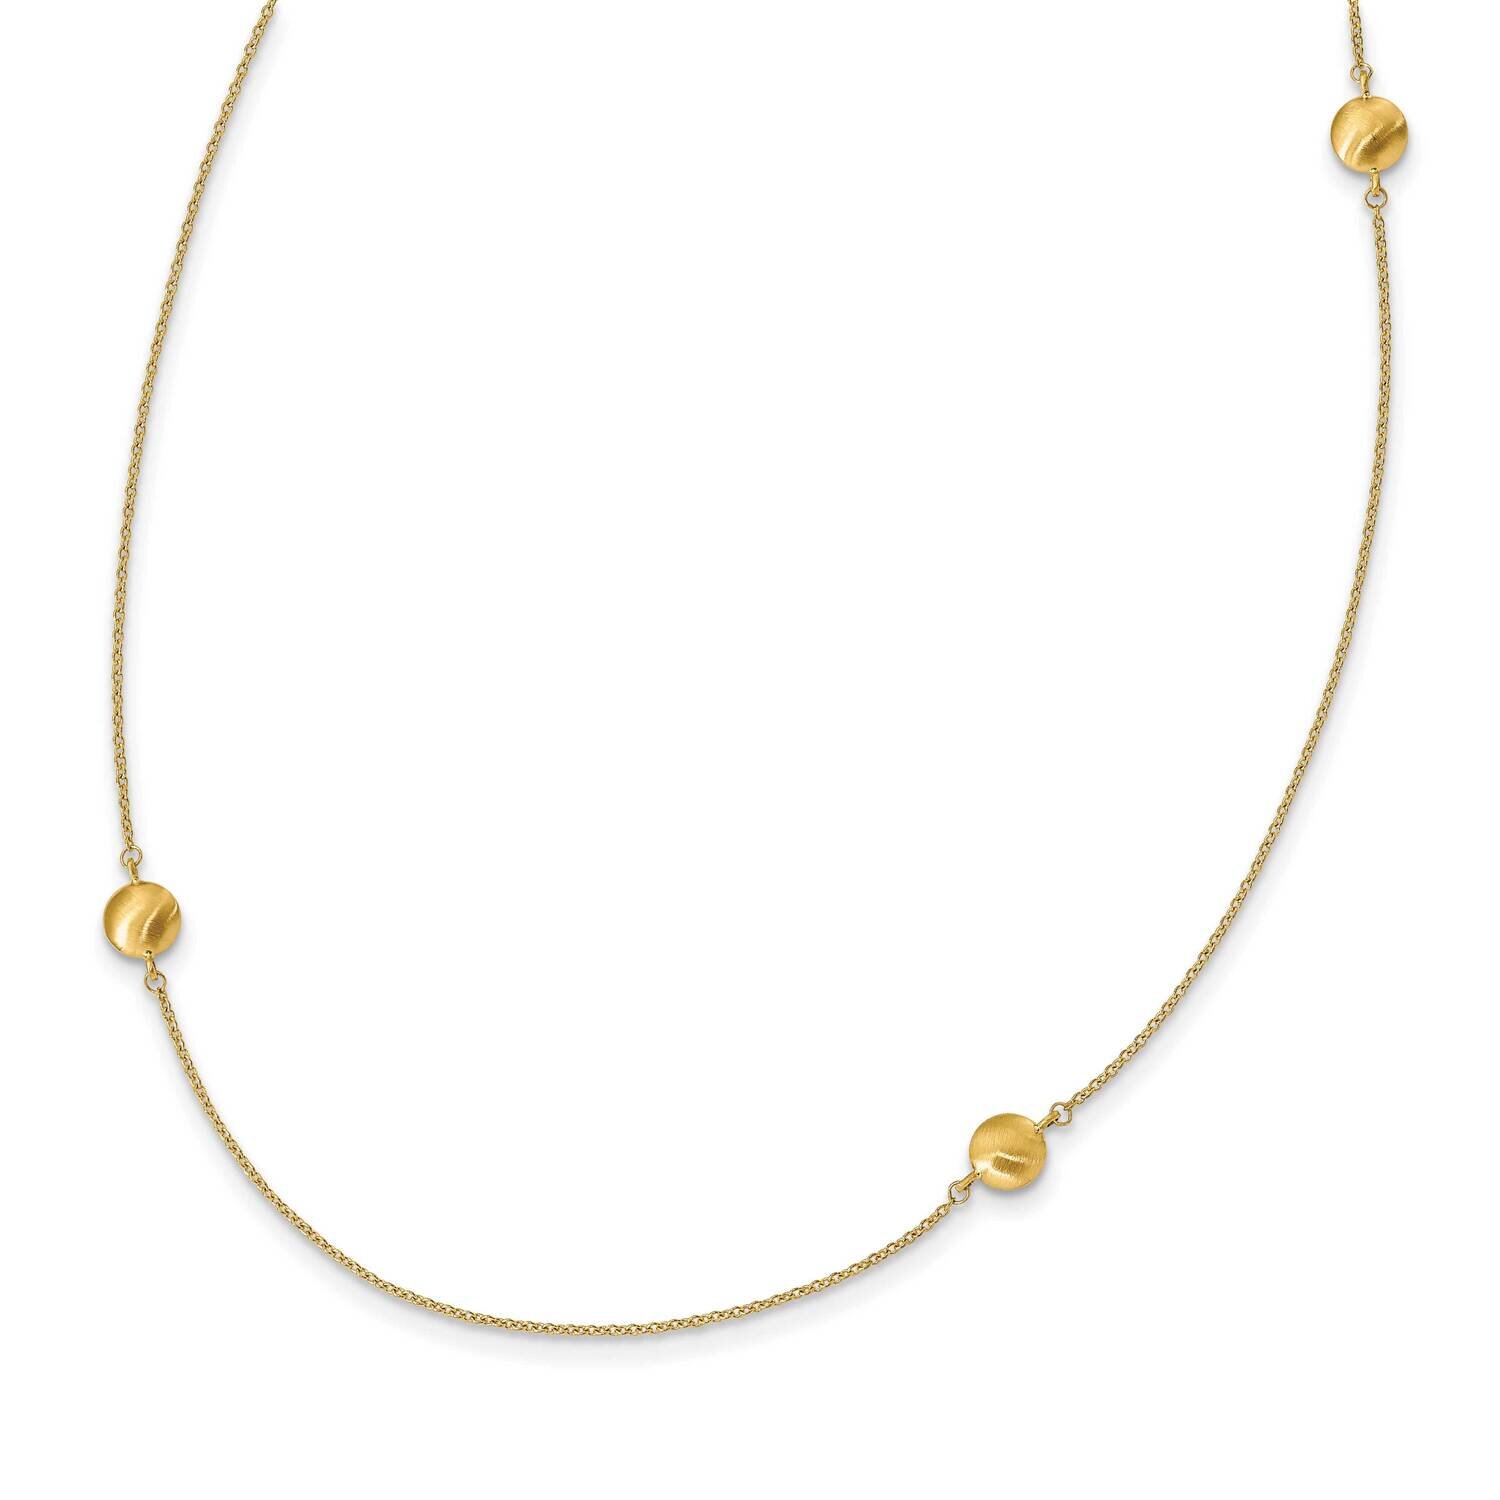 Brushed and Polished 8 Station Fancy 36 Inch Necklace 14k Gold SF2935-36